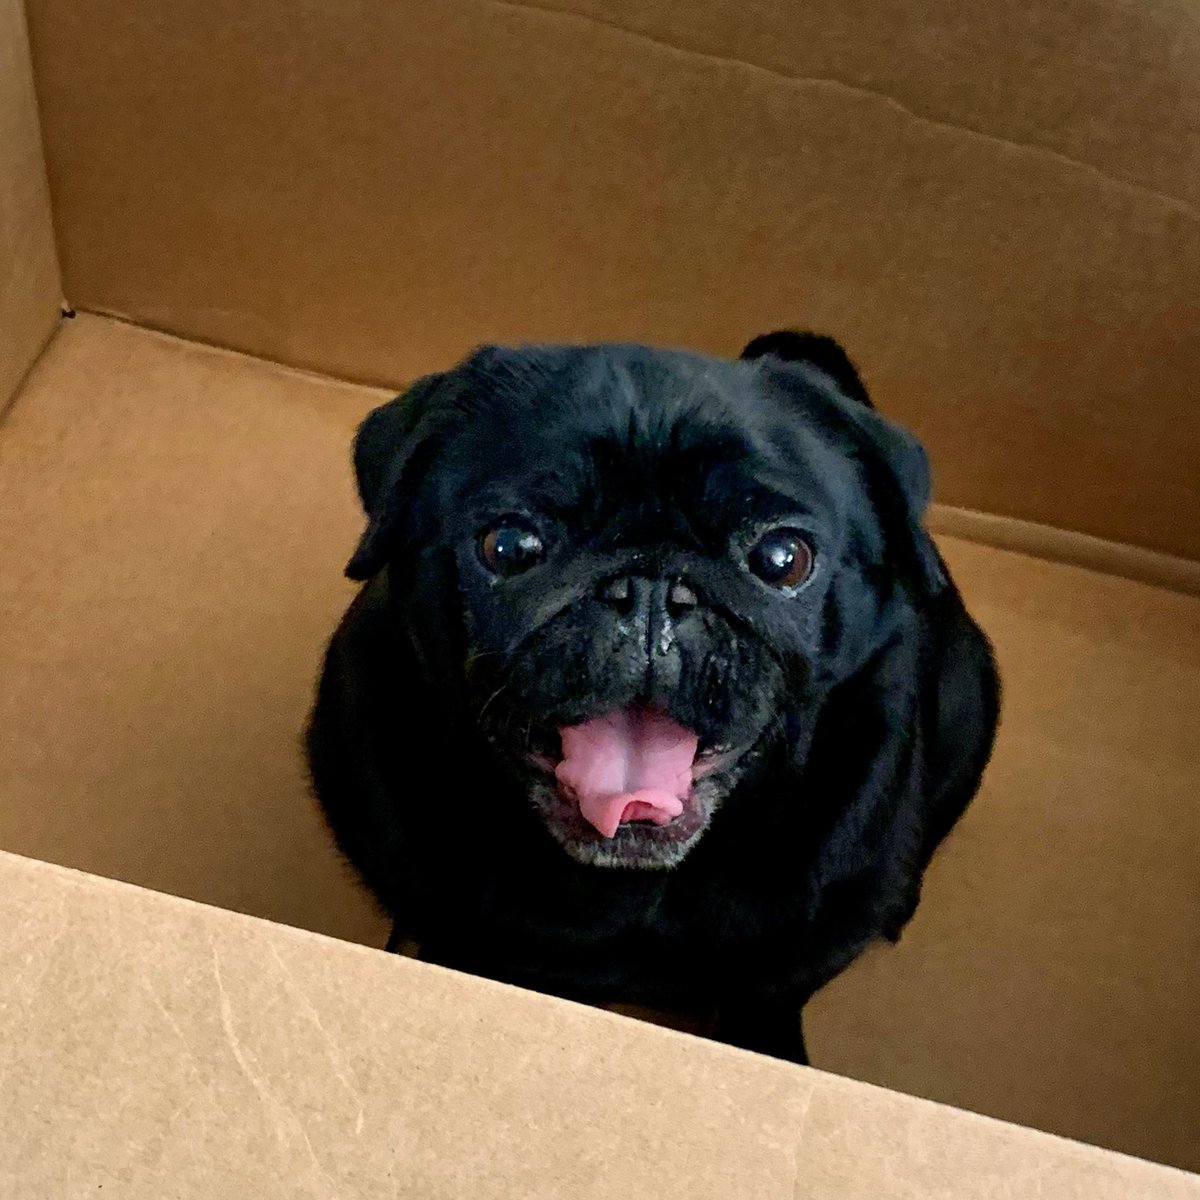 Tongue out, Leota in (the box)

#tot #tongueouttuesday #scribblepugtot #sallypughugs #lovefromleota #blackpugs 
#puglife #pug #pugs #pugsofinstagram #dogsoftwitter #pittsburghpug #dogsofpittsburgh #dogsoftheburgh